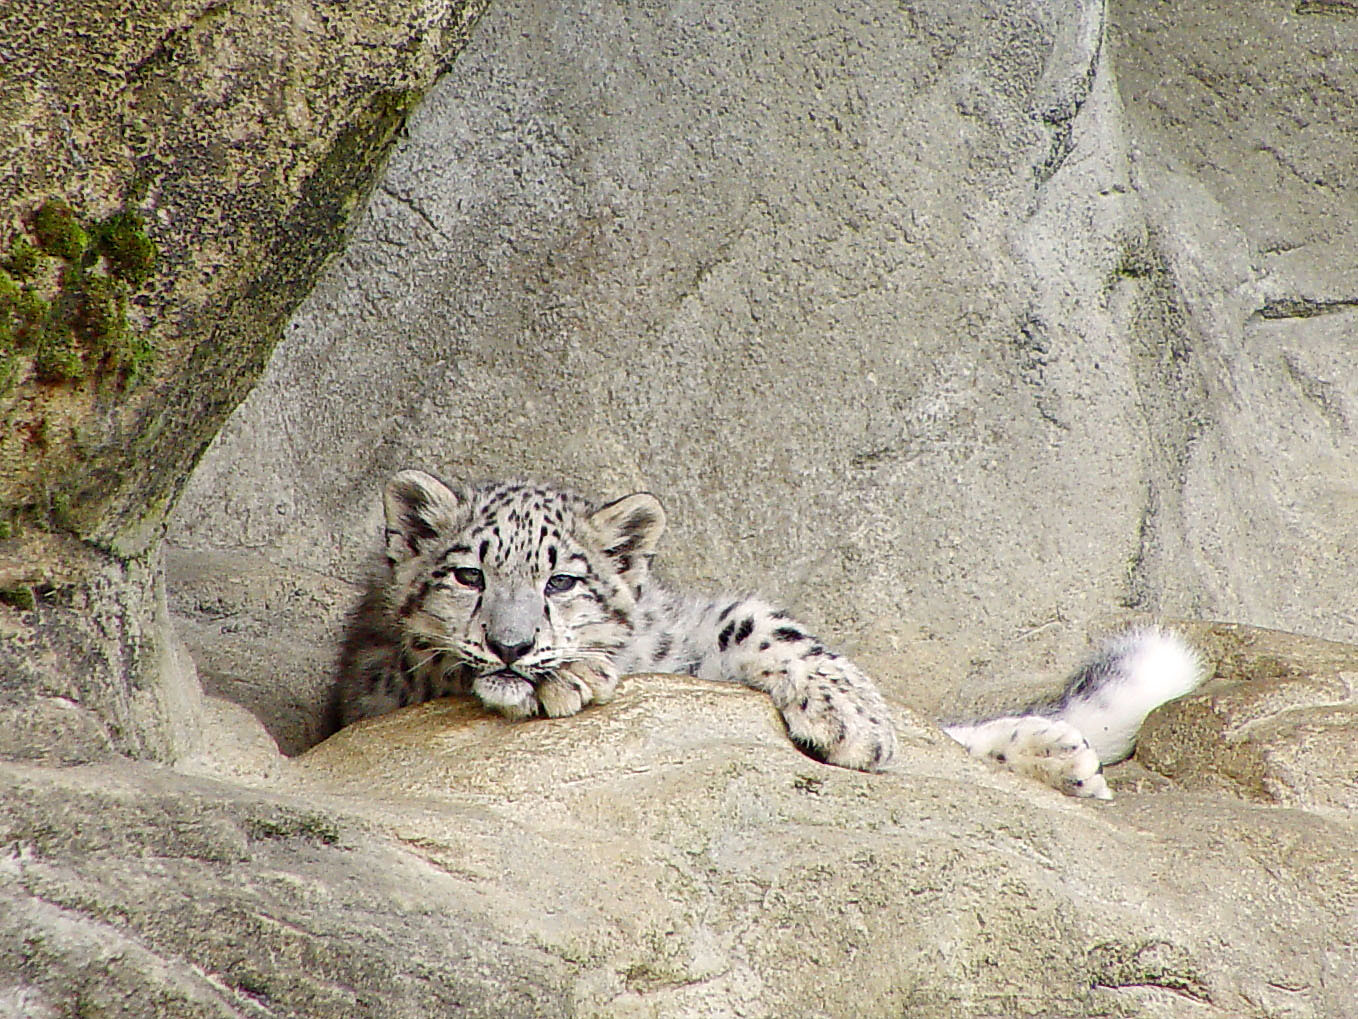 Cub of the zoo of Zurich